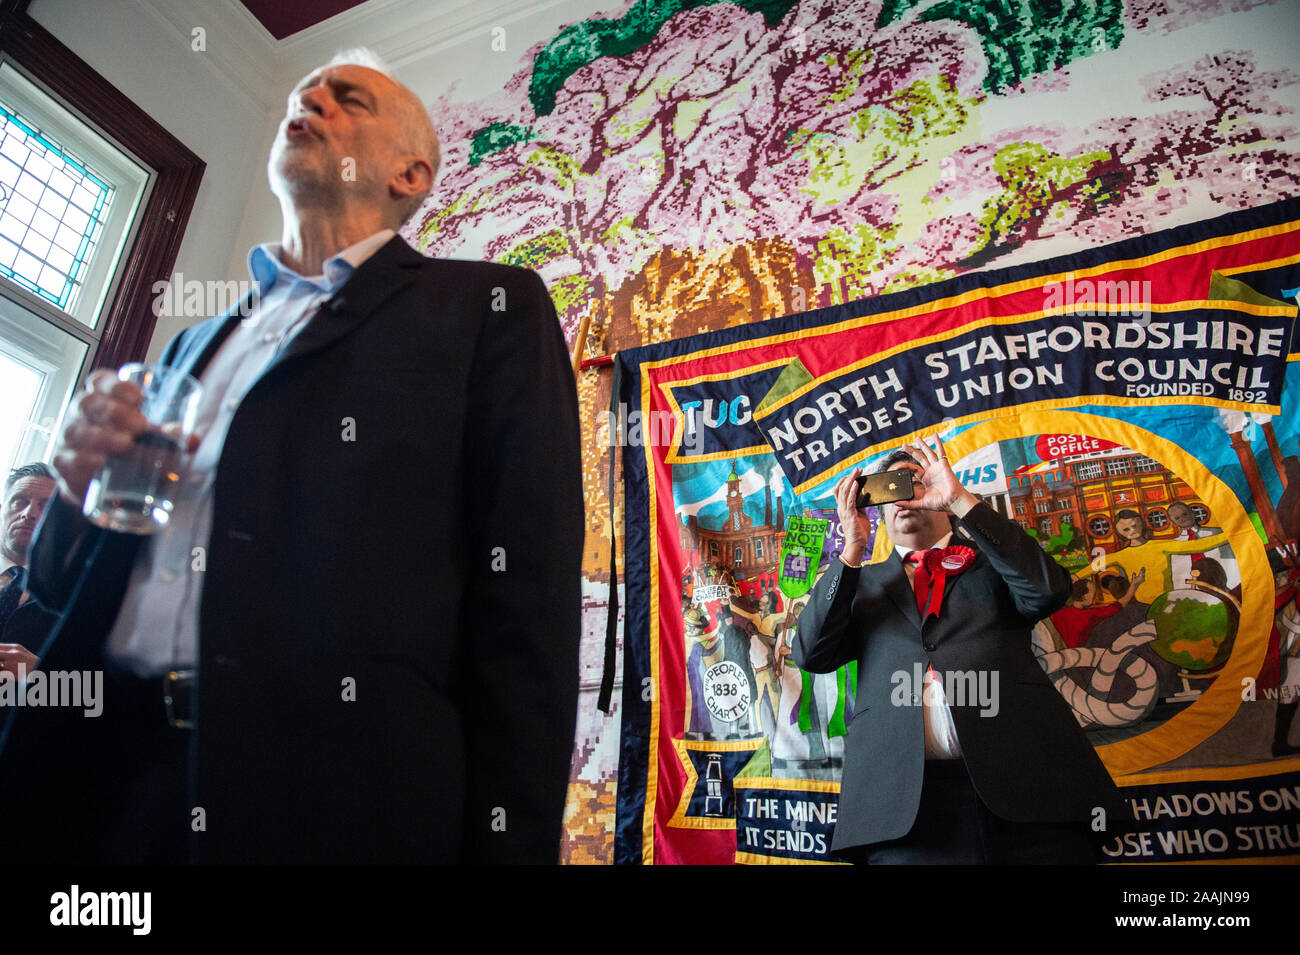 Staffordshire, UK. 22 November 2019. Labour leader Jeremy Corbyn with Stoke South labour candidate Mark McDonald (right) at a Labour rally in Fenton, Stoke-on-Trent. The Stoke South seat is marginal with the Conservatives holding a majority of just over 600 votes. Credit: Benjamin Wareing/ Alamy Live News Stock Photo